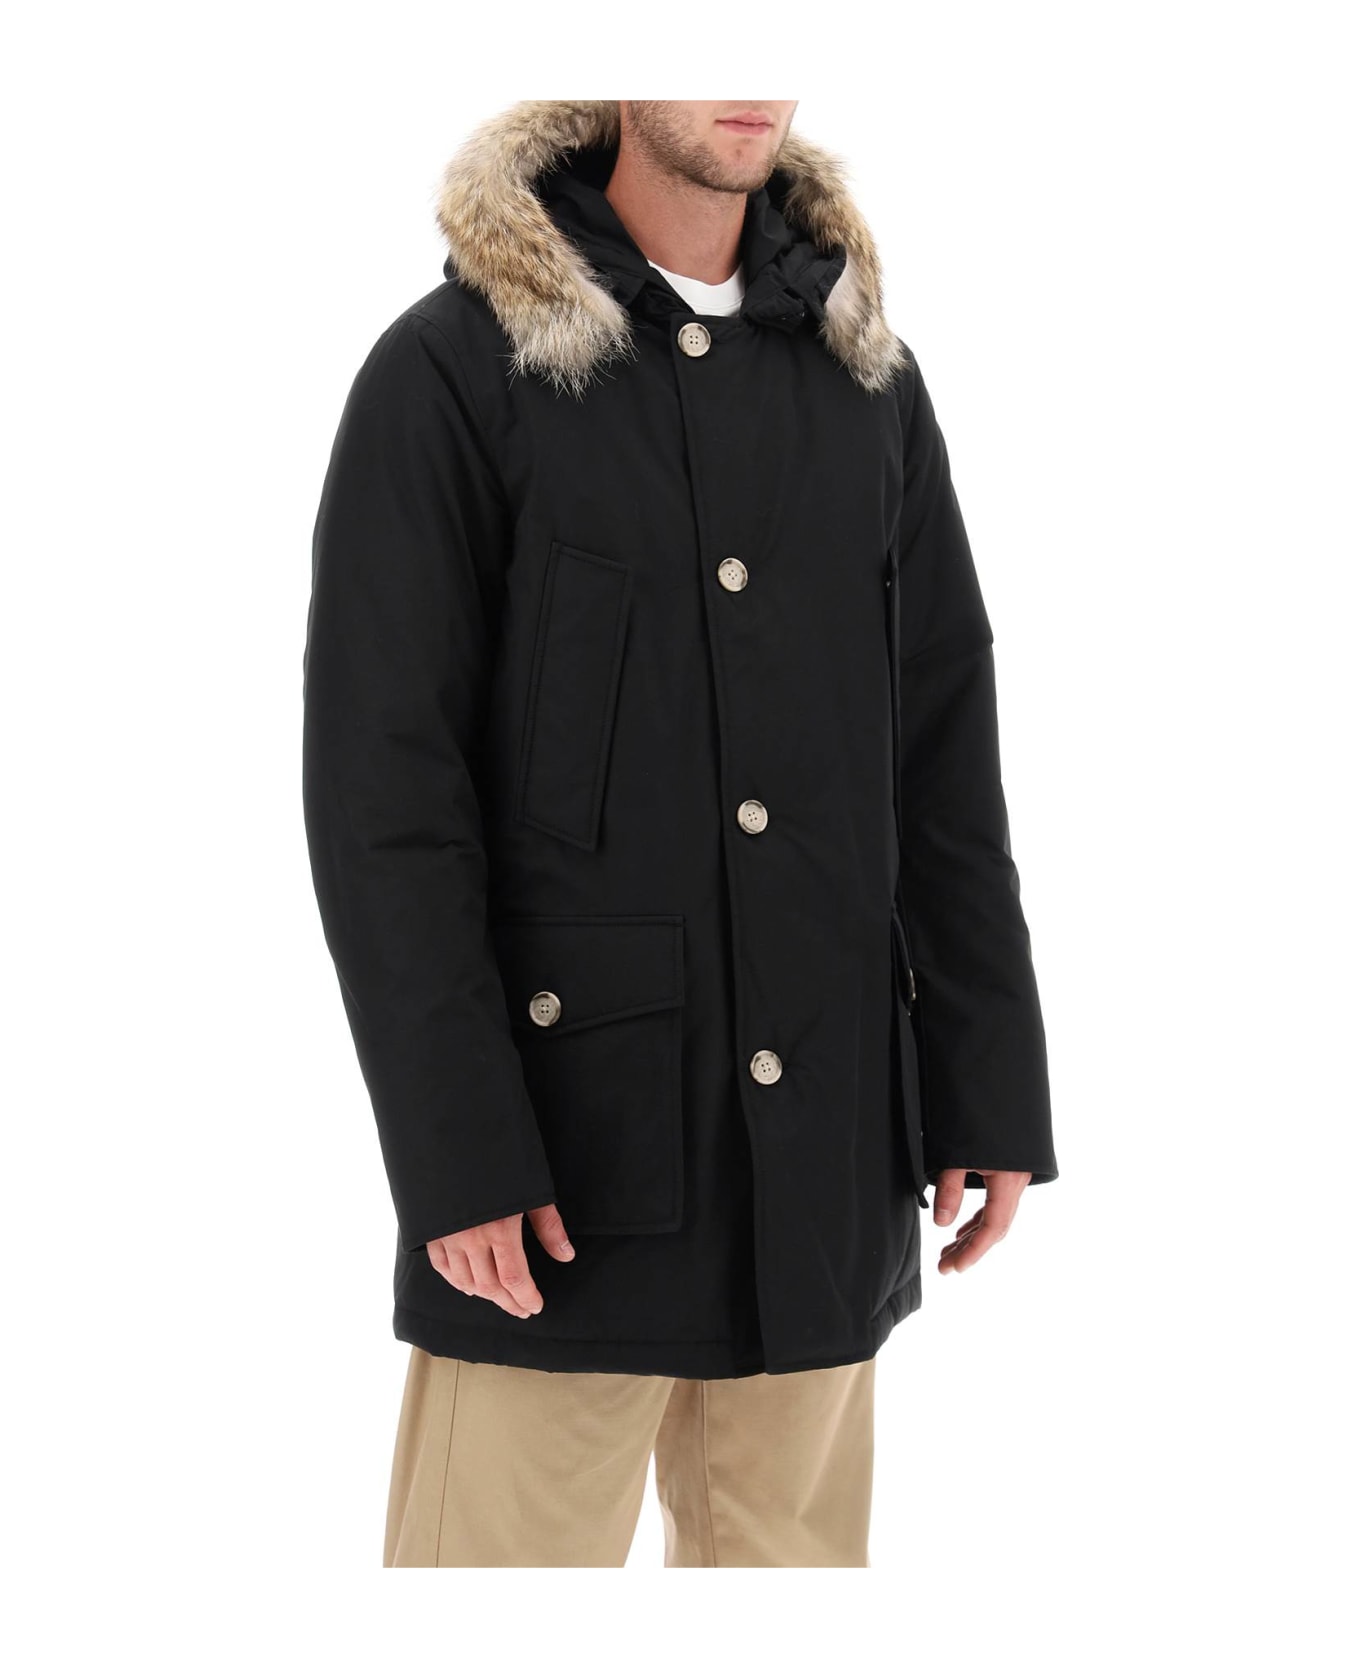 Woolrich Arctic Parka With Coyote Fur - Black